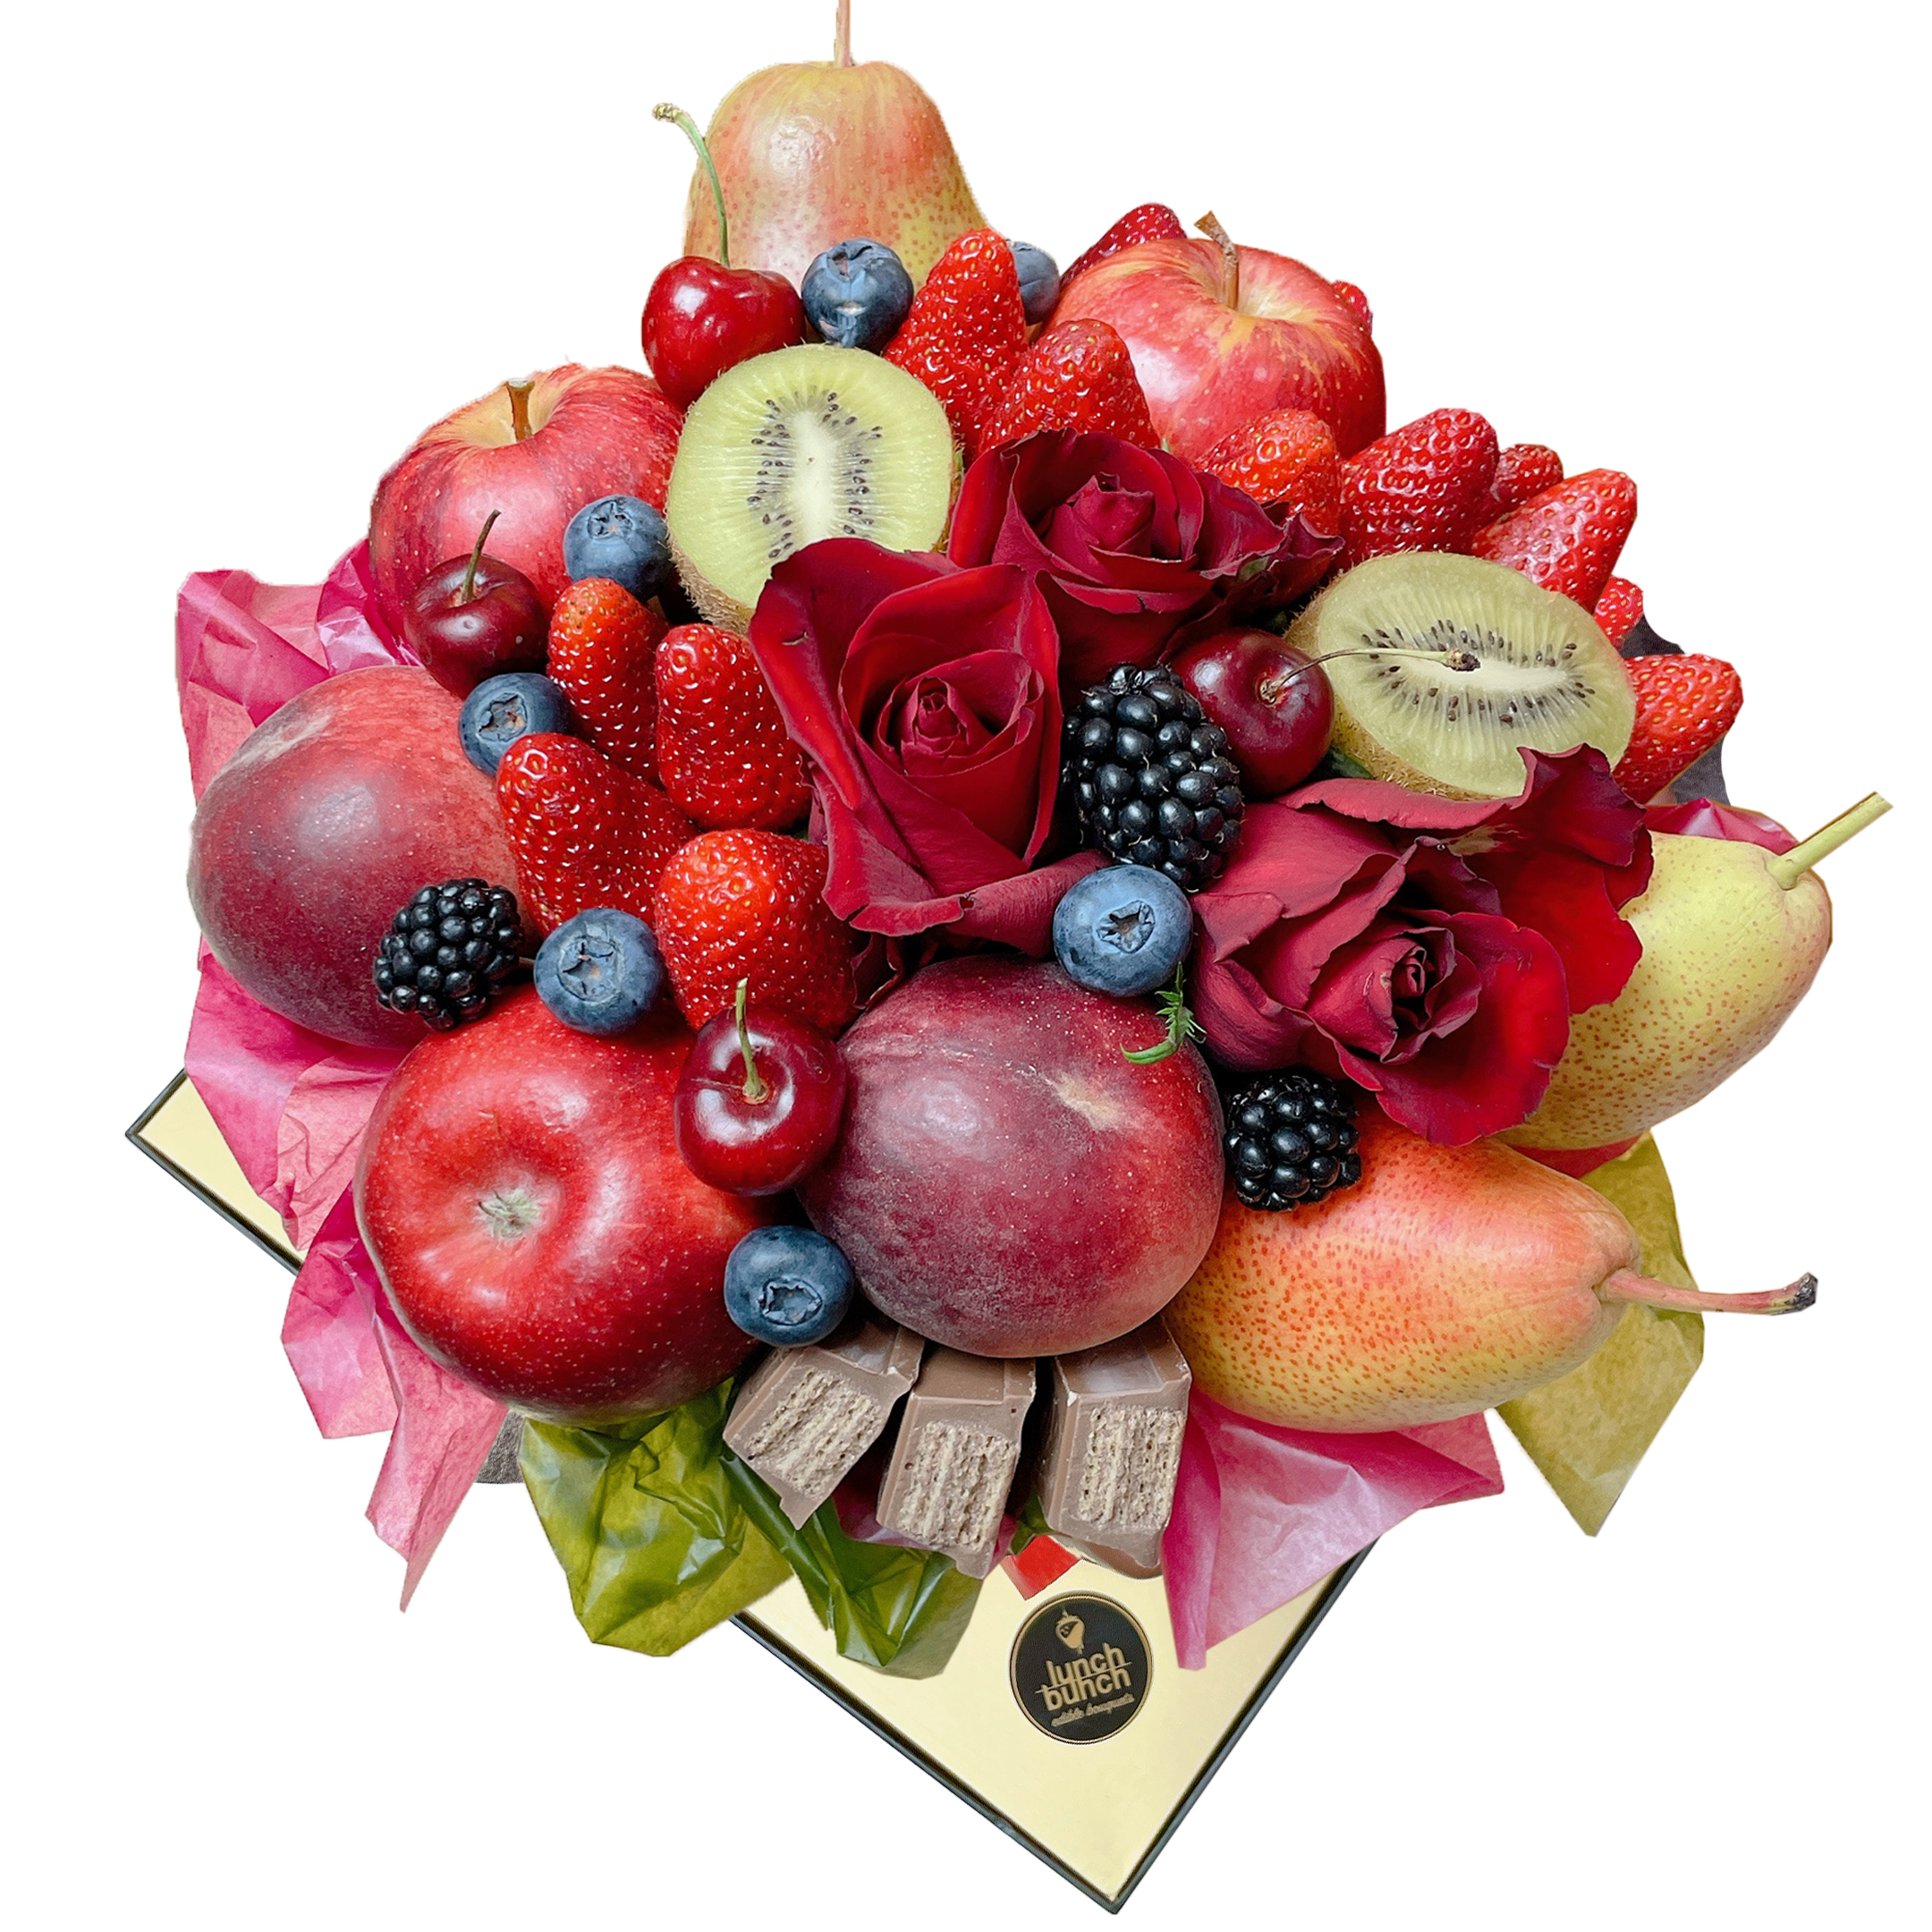 Christmas 2021 gift, Fruit Bouquet Adelaide Delivery, Same Day delivery Adelaide, Fresh Fruits Basket delivery, Fruit Hamper Delivery, Fruits Flowers bouquet, Strawberries Bouquet online, Red Christmas Bouquet